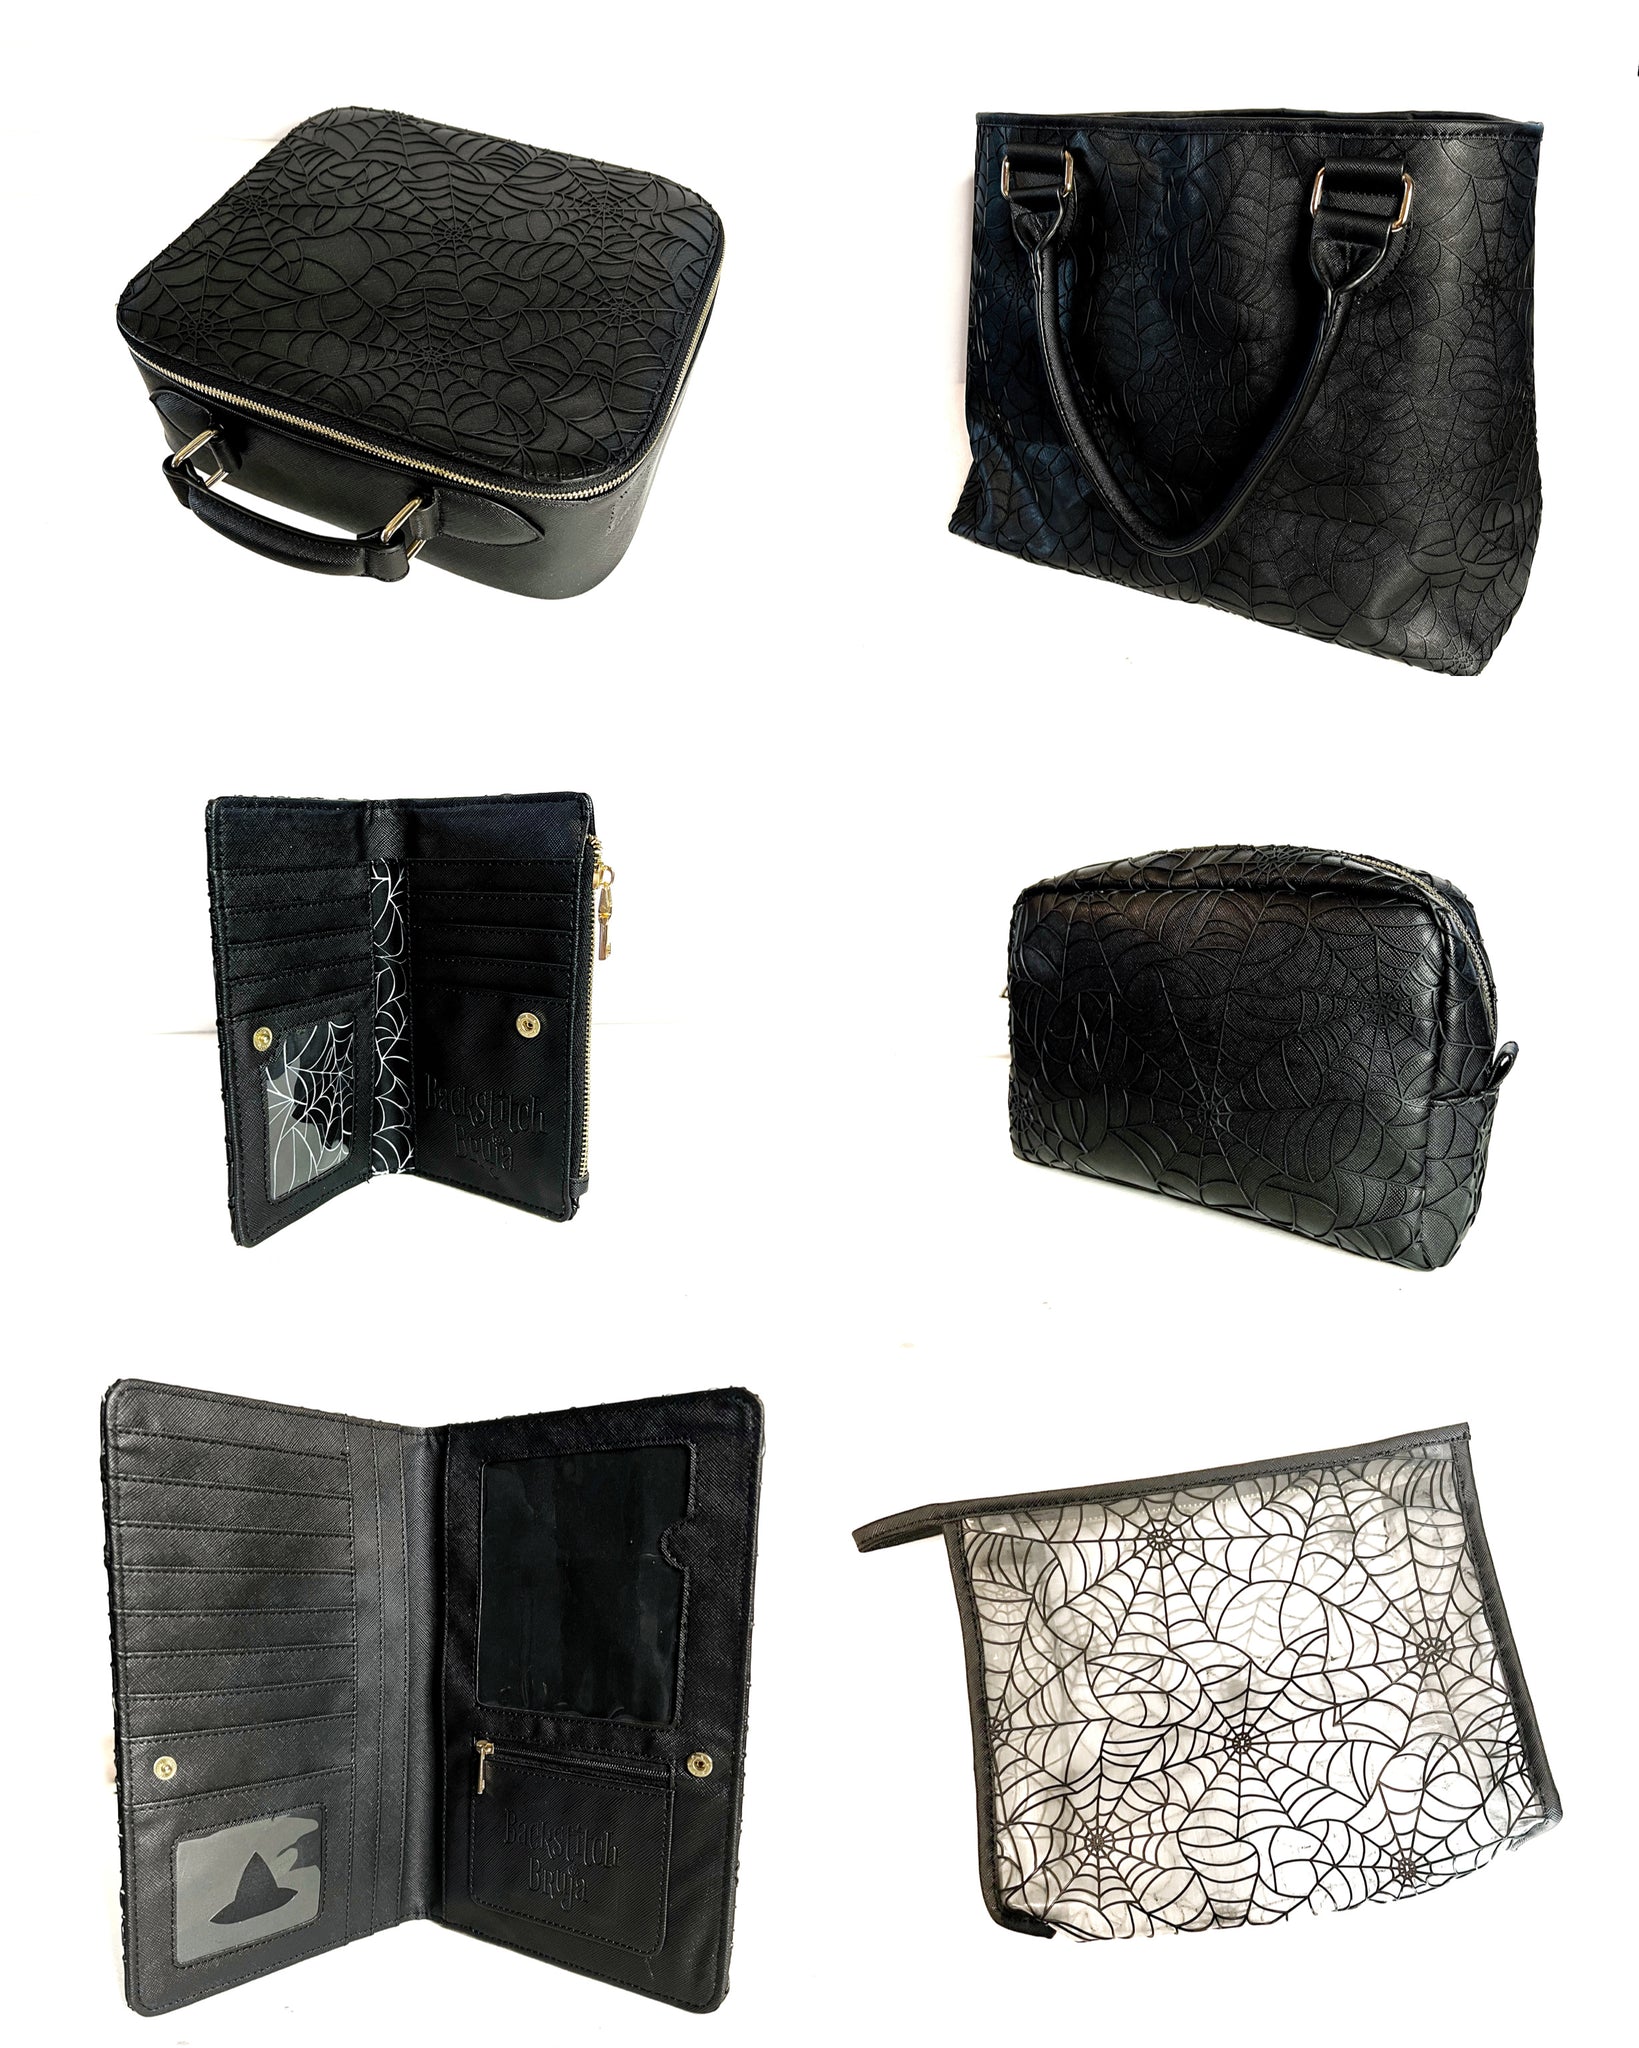 Bag of Tricks: Embossed Leather Wallet Pouch/ Clutch Black